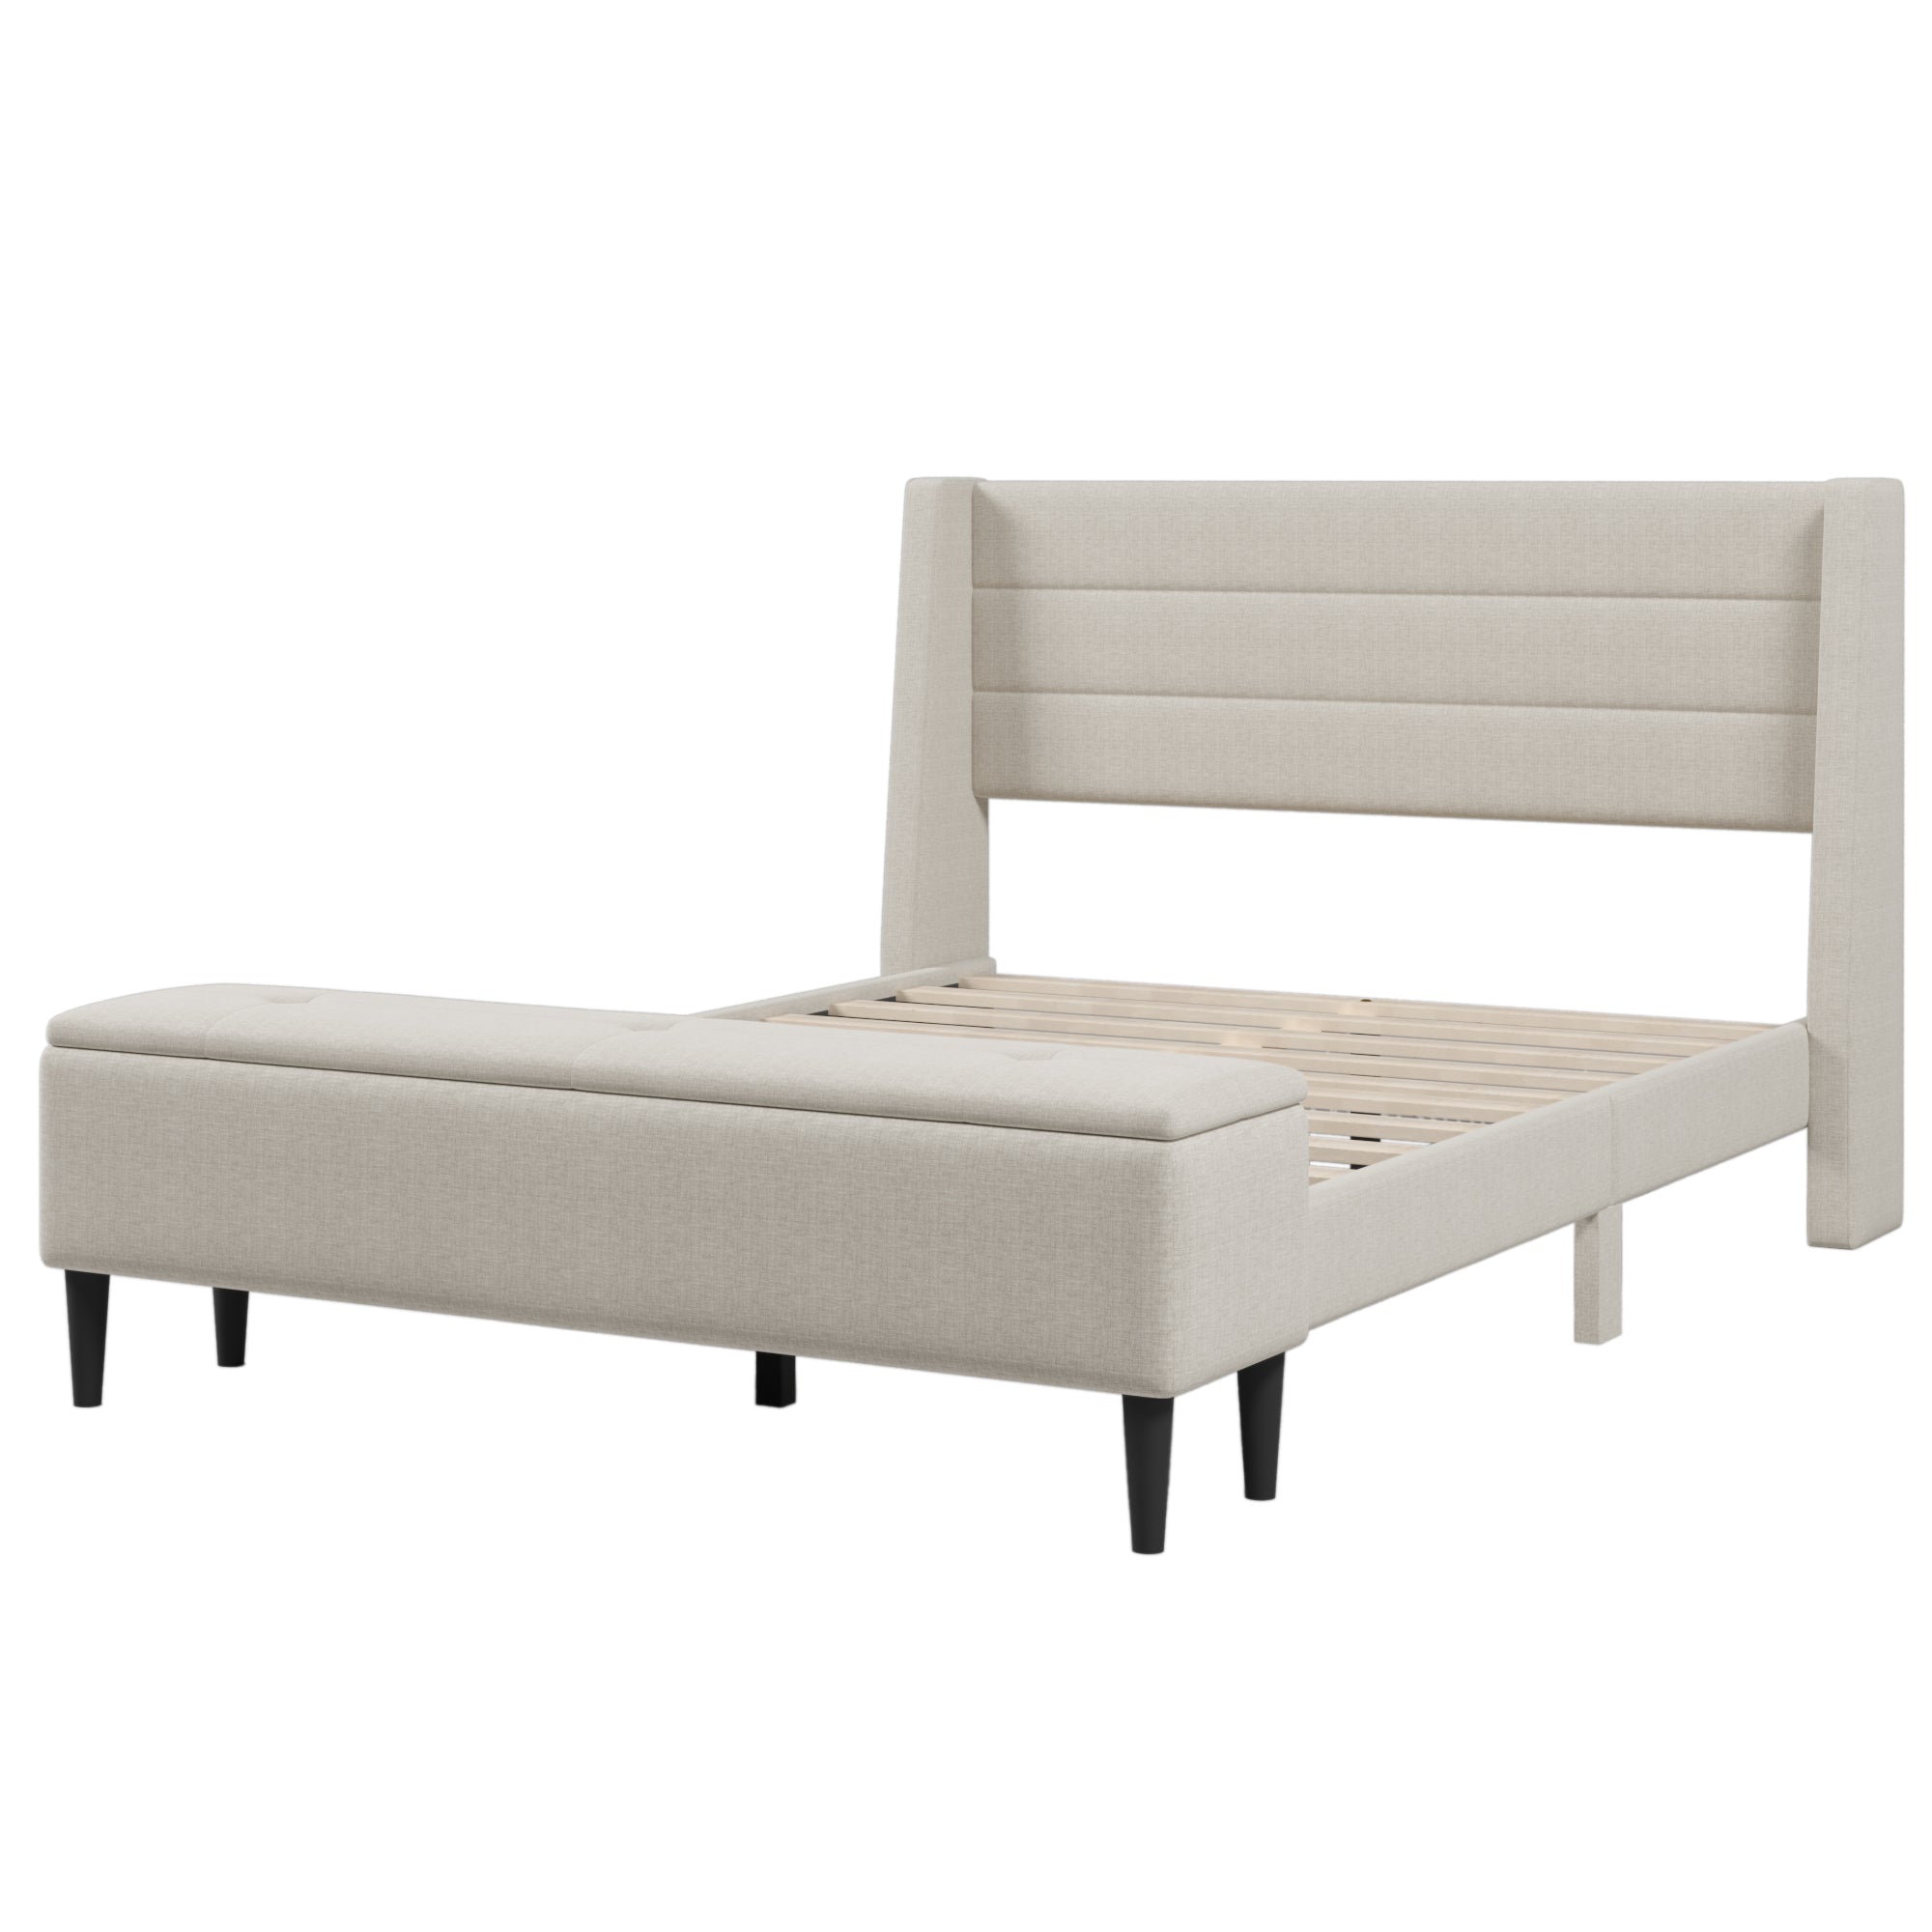 Upholstered Storage Bed Frame with Storage Ottoman Bench Queen size(Beige)